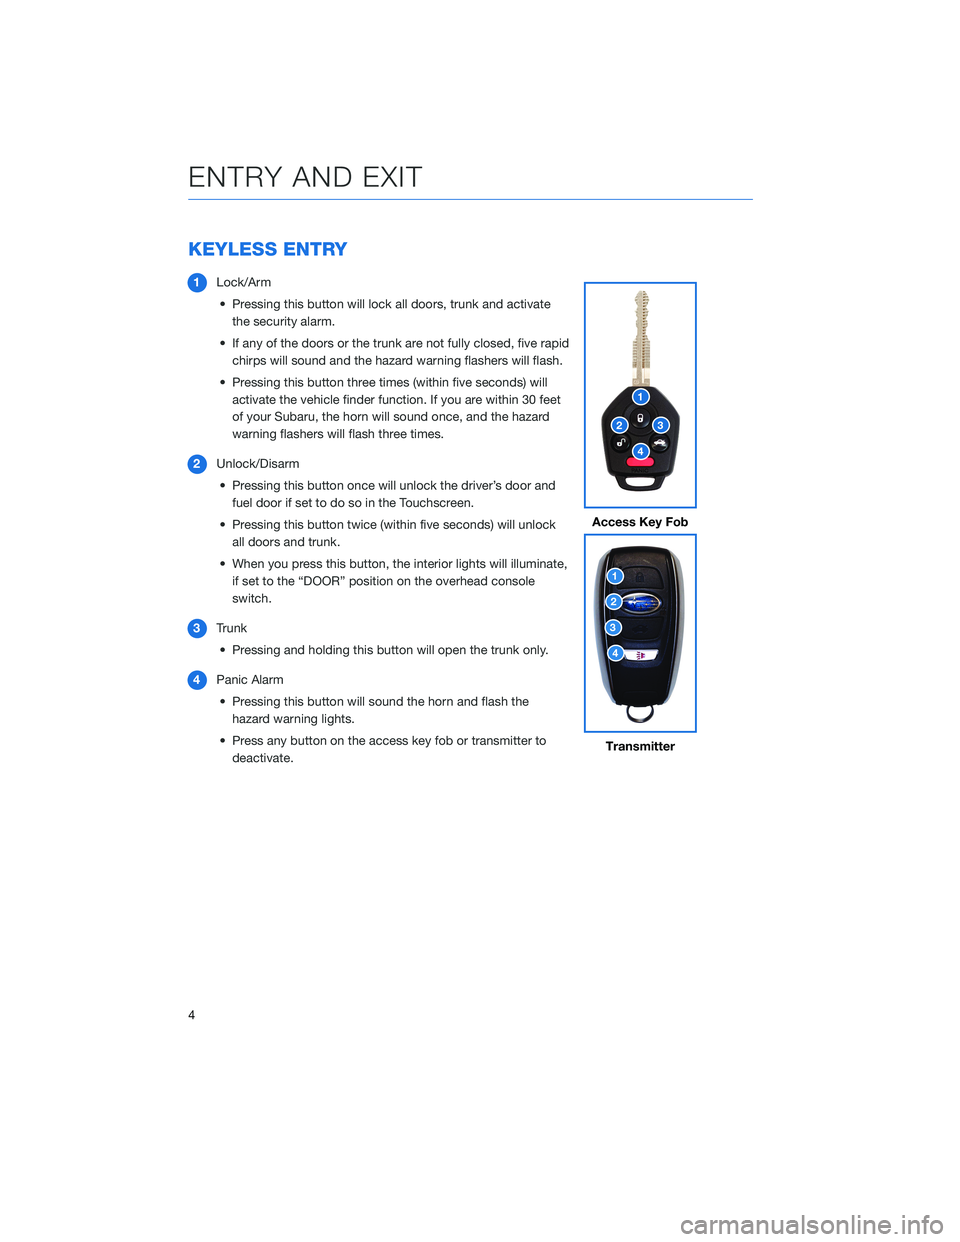 SUBARU WRX 2020  Quick Guide KEYLESS ENTRY
1Lock/Arm
• Pressing this button will lock all doors, trunk and activate
the security alarm.
• If any of the doors or the trunk are not fully closed, five rapid
chirps will sound and